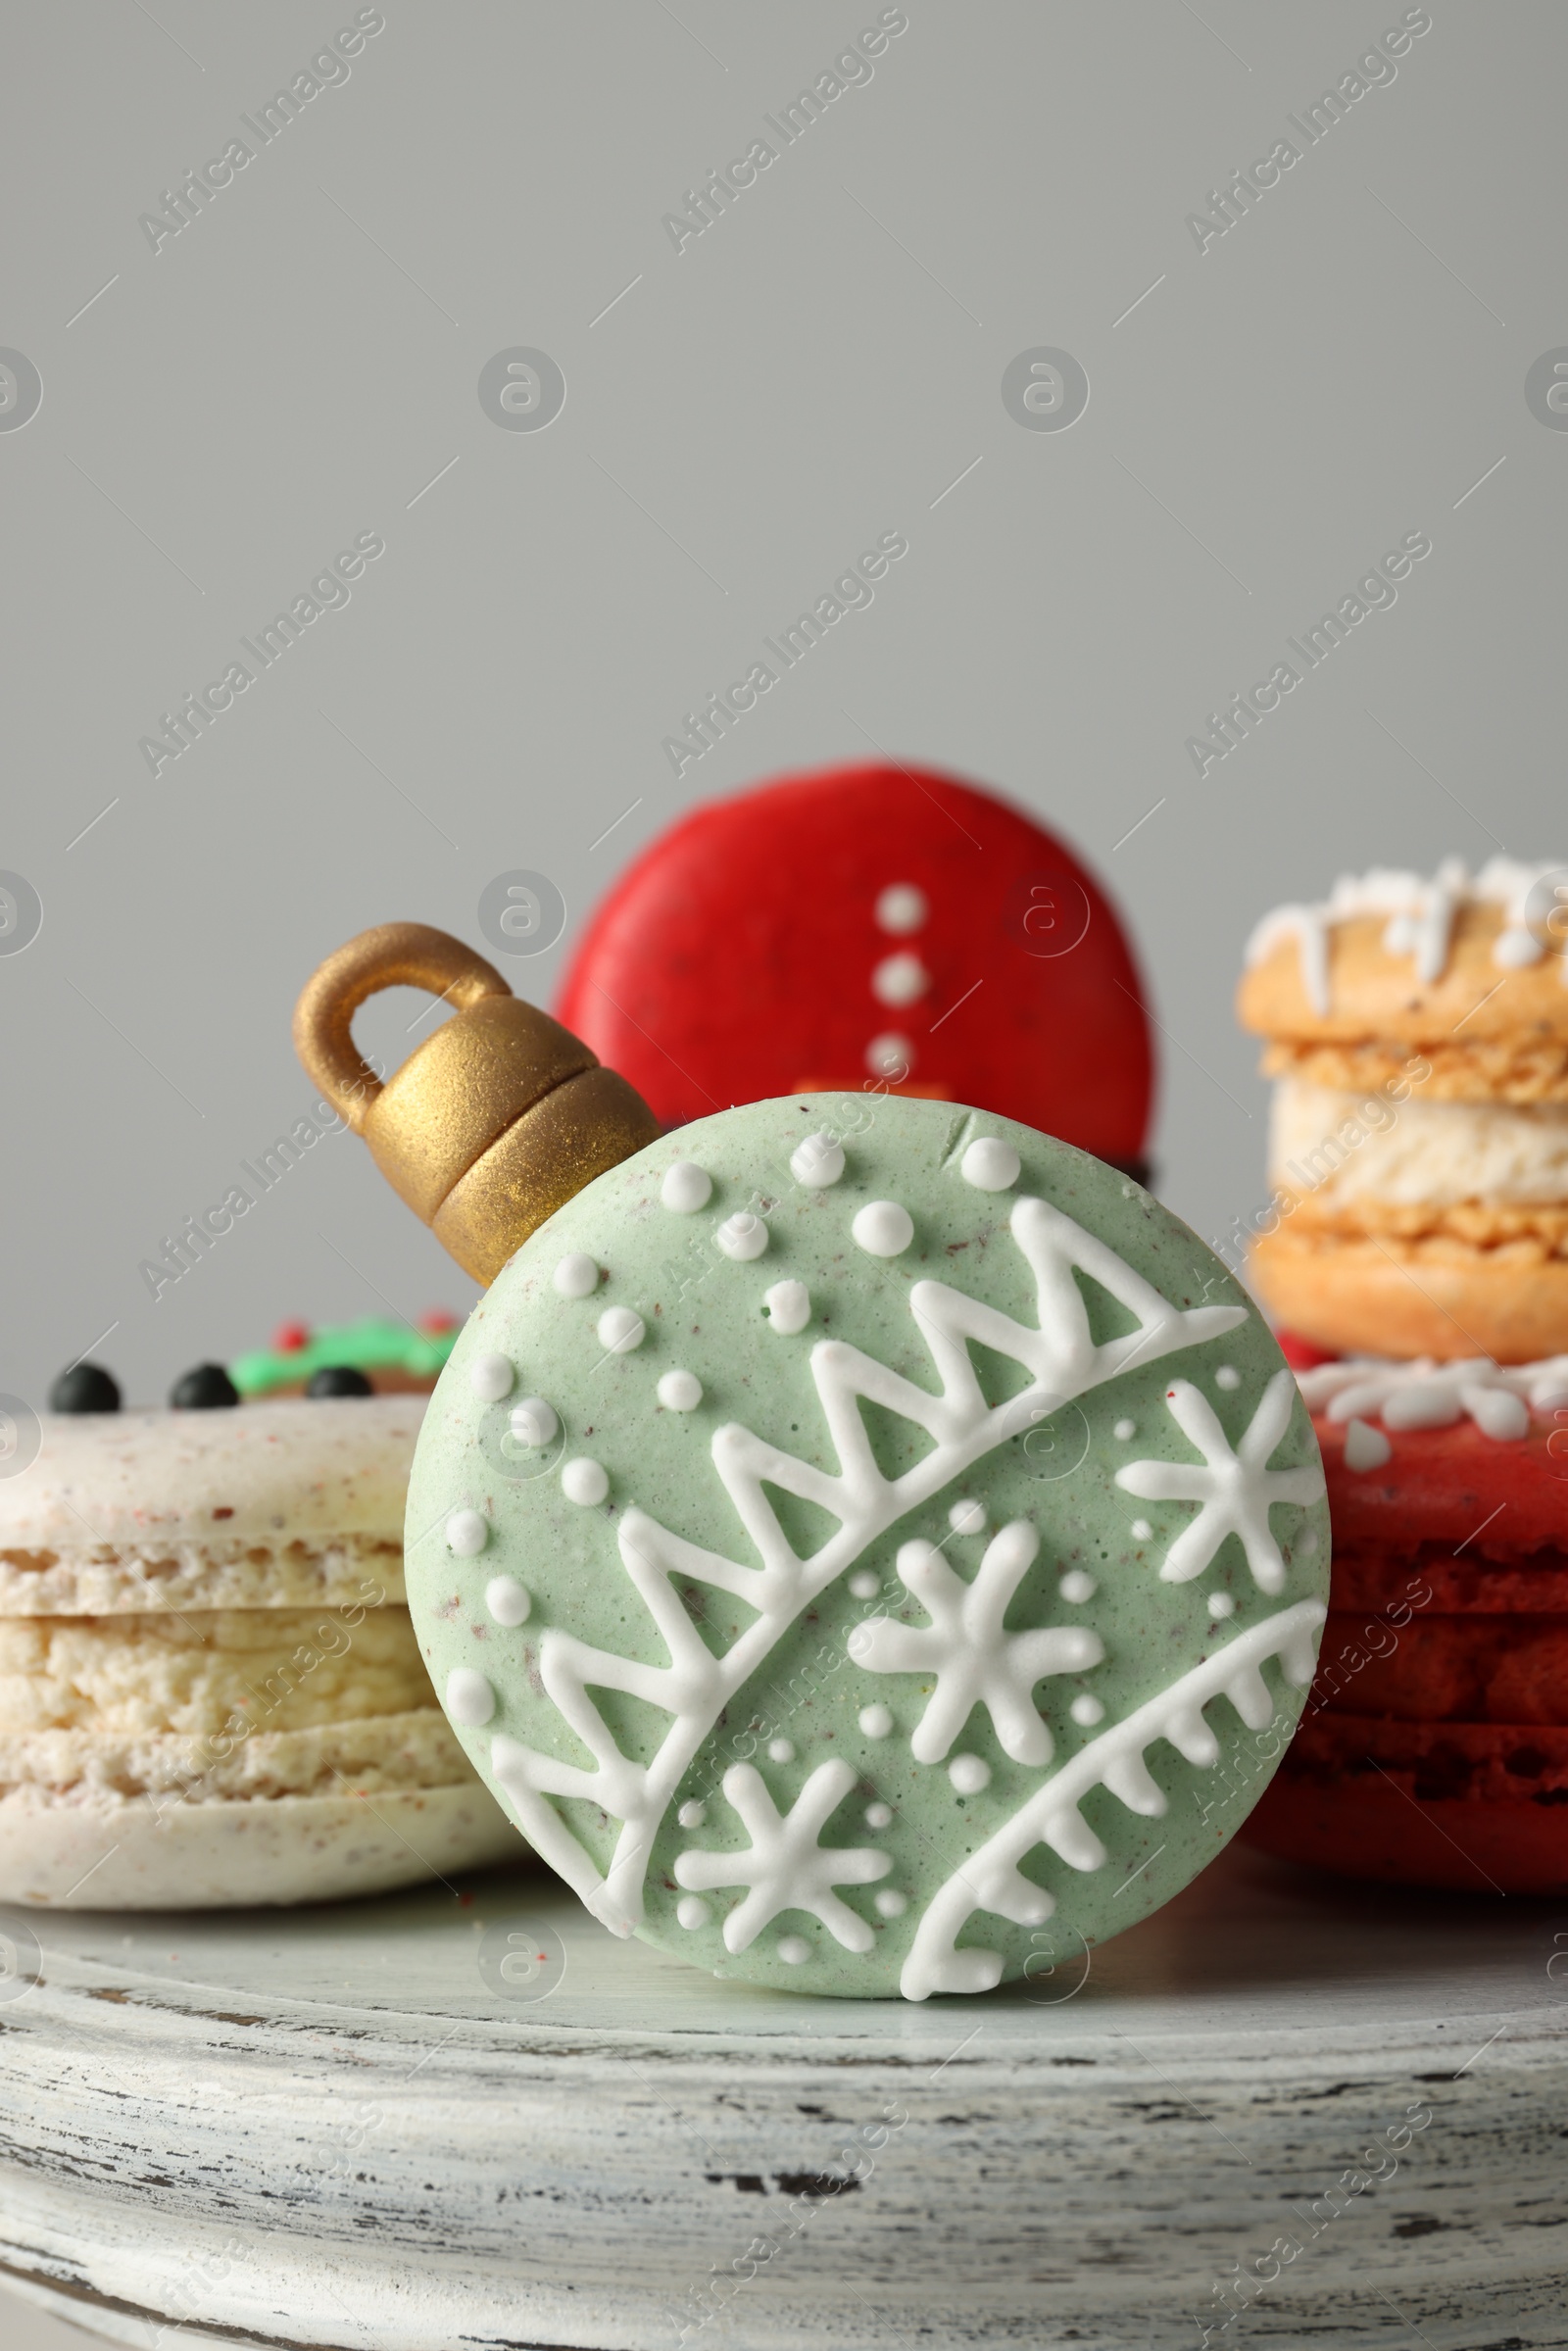 Photo of Beautifully decorated Christmas macarons on stand against light grey background, closeup